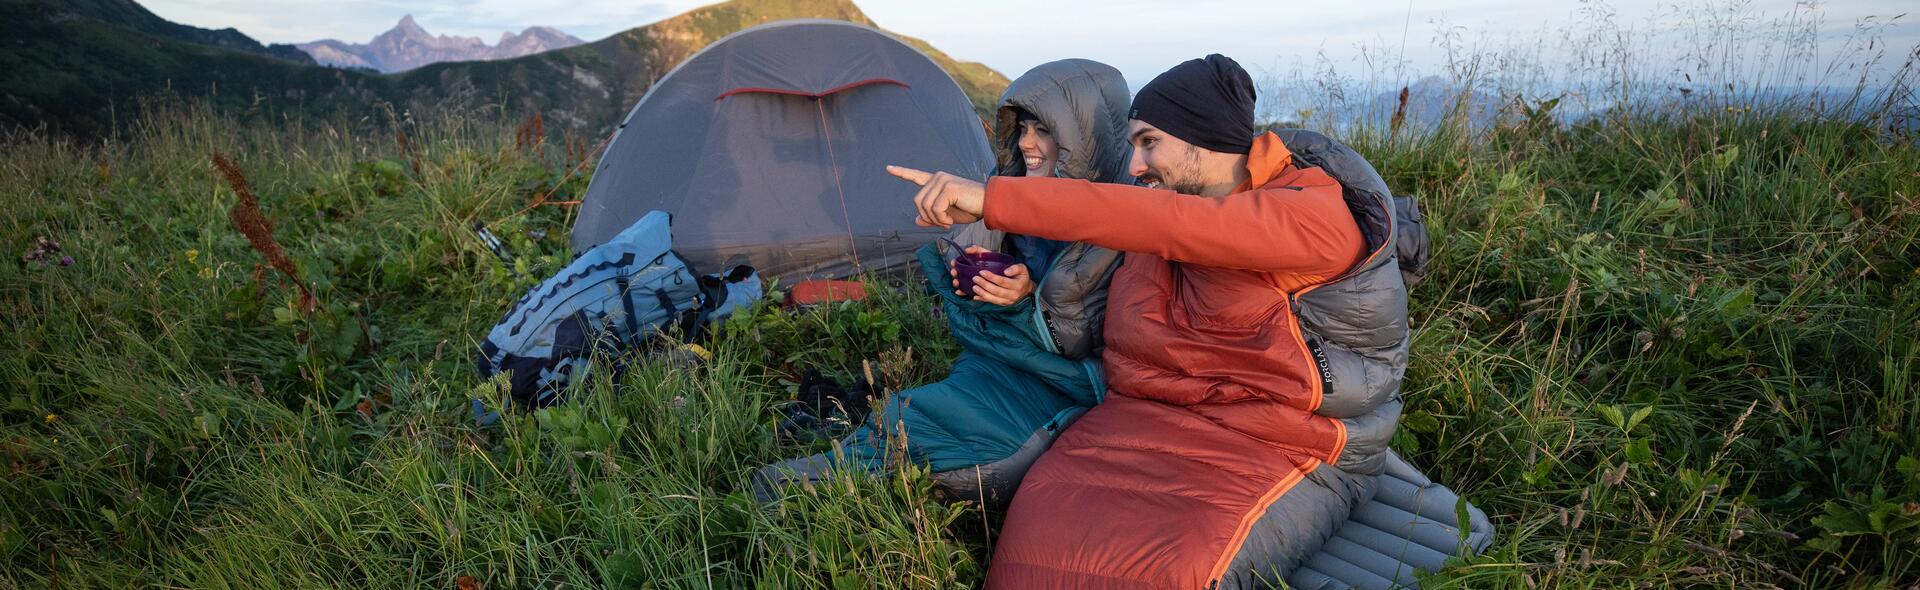 Choosing the right sleeping bag for hiking or bivouacking